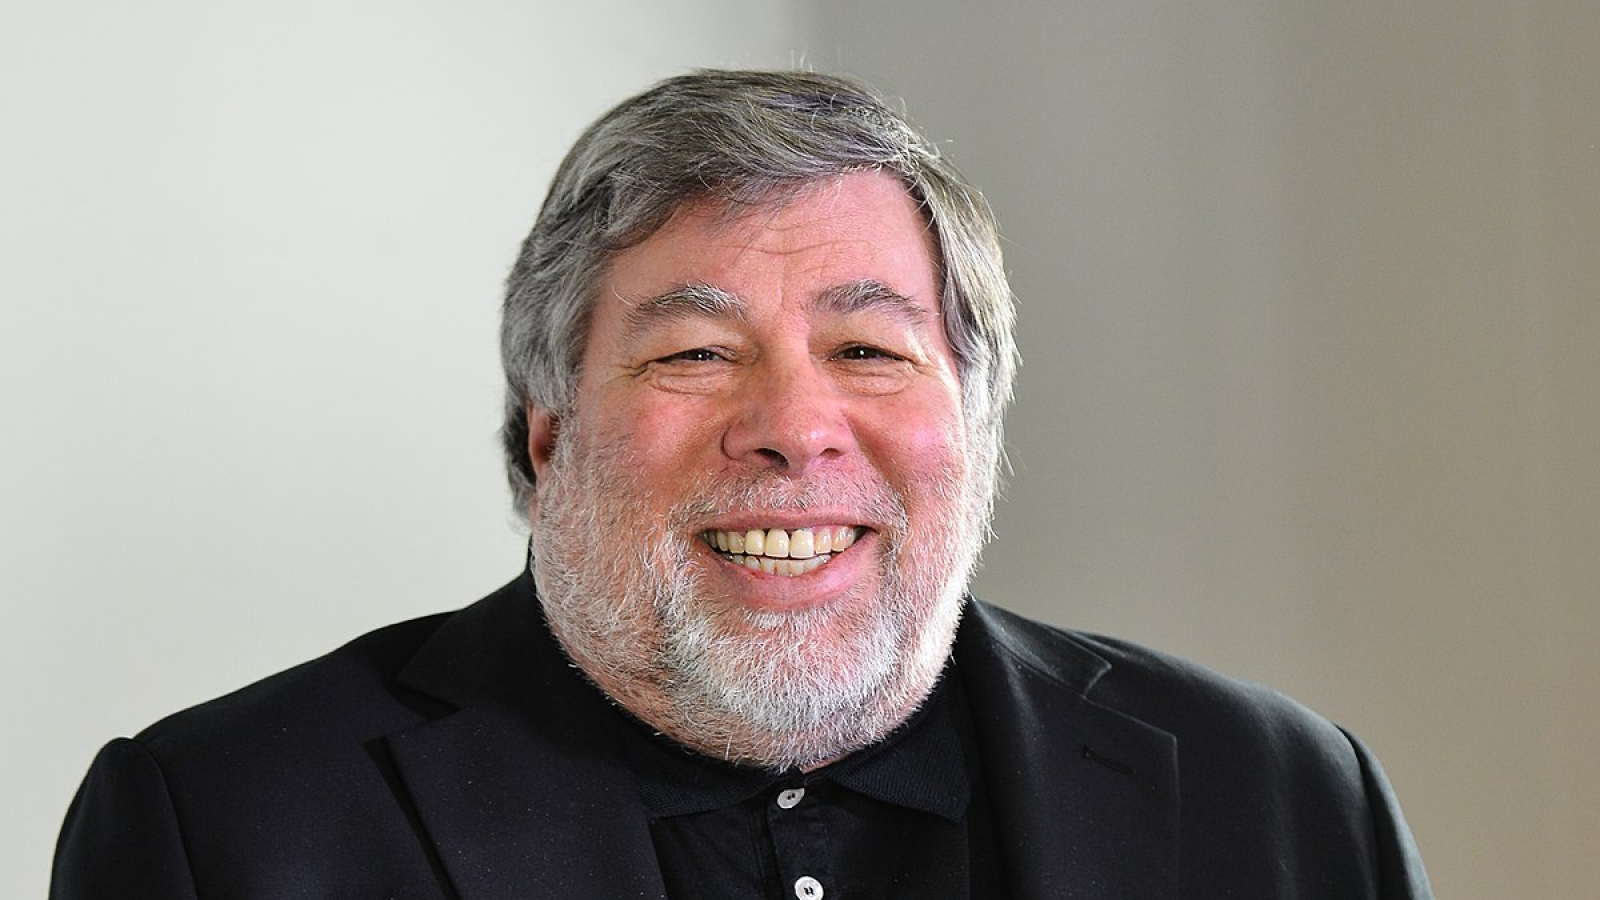 Apple Co Founder Steve Wozniak Calls Bitcoin A Miracle, Says It's Better Than Gold